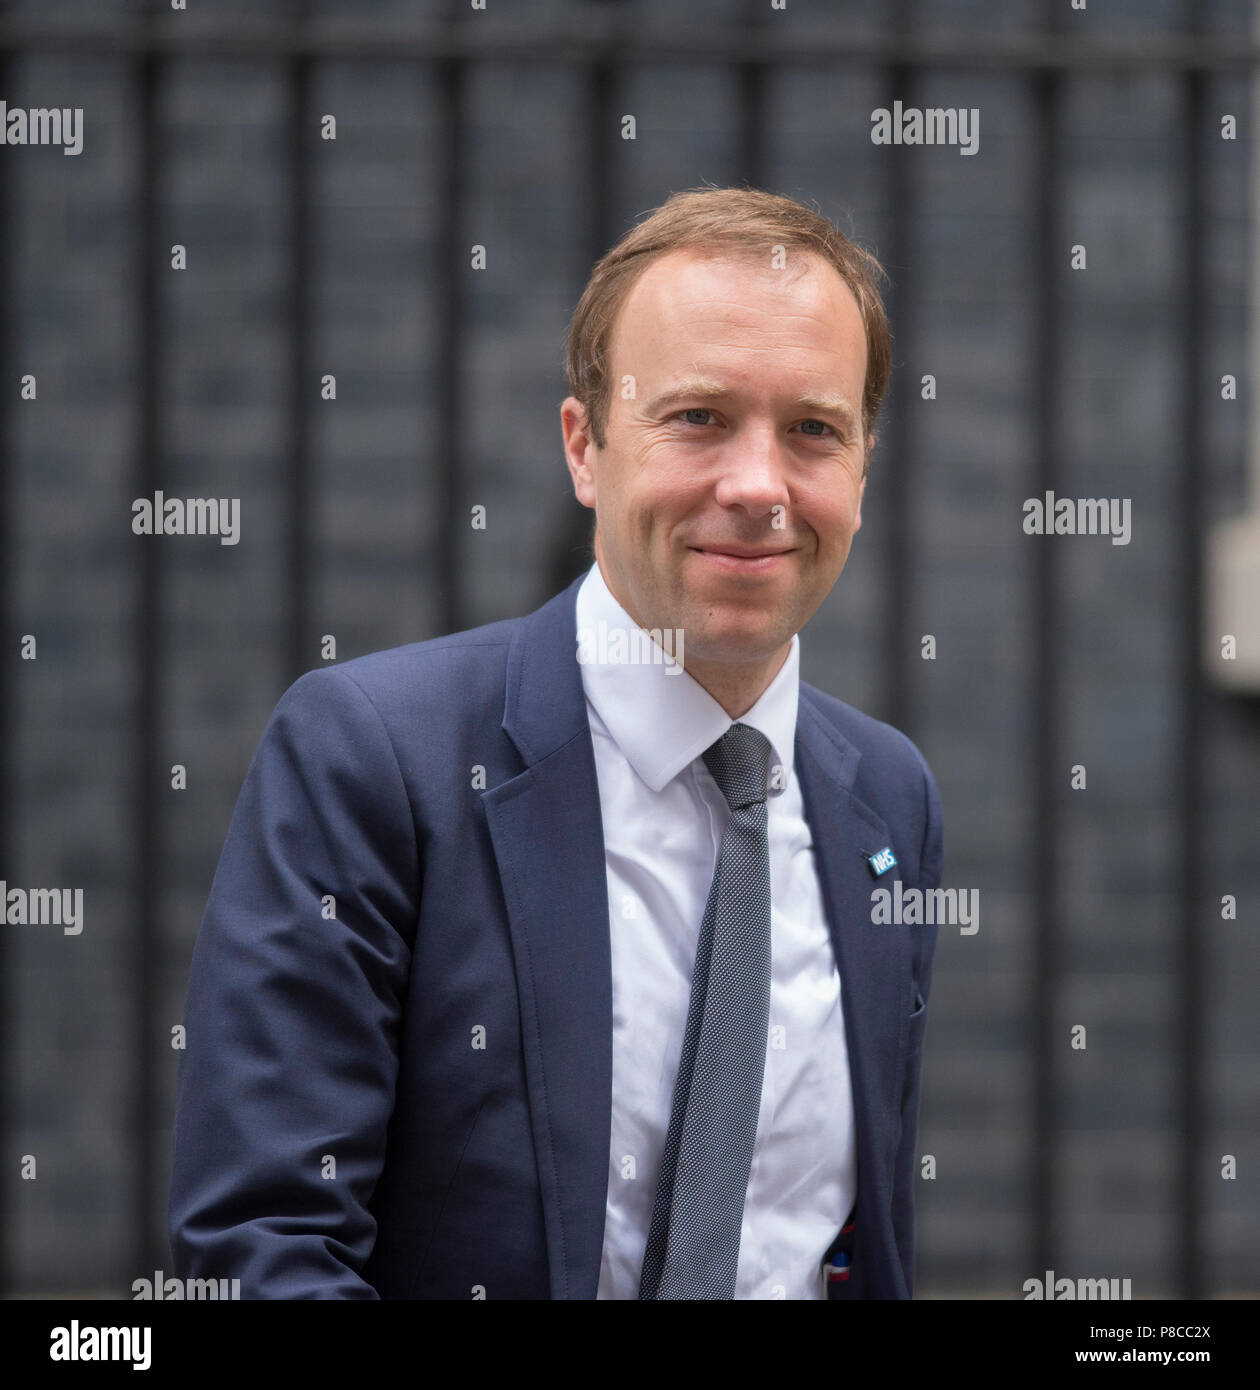 Downing Street, London, UK. 10 July 2018.  Matt Hancock, newly appointed Secretary of State for Health and Social Care leaves Downing Street wearing NHS badge after weekly cabinet meeting following a major reshuffle after David Davis and Boris Johnson resign over PM’s Brexit strategy. Credit: Malcolm Park/Alamy Live News. Stock Photo